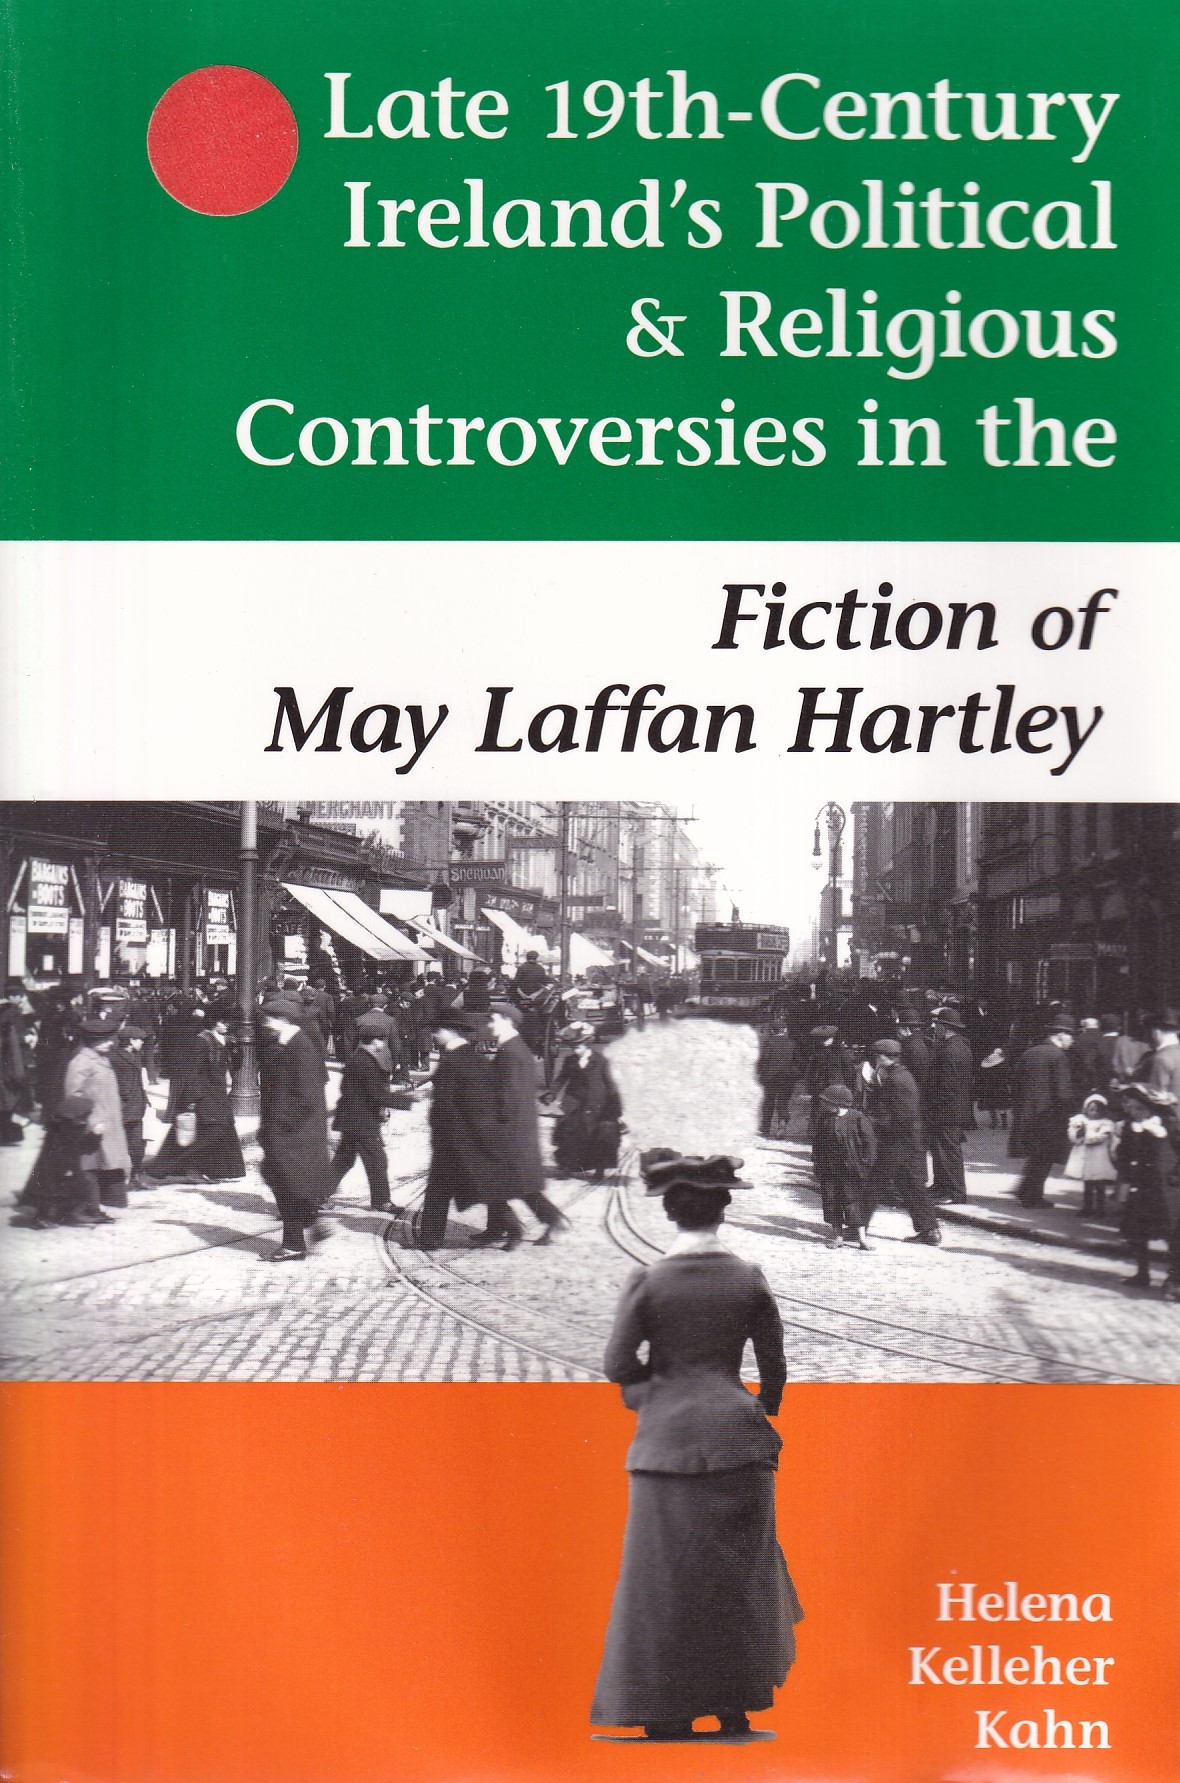 Late 19th-Century Ireland’s Political & Religious Controversies in the Fiction of May Laffan Hartley | Helena Kelleher Kahn | Charlie Byrne's